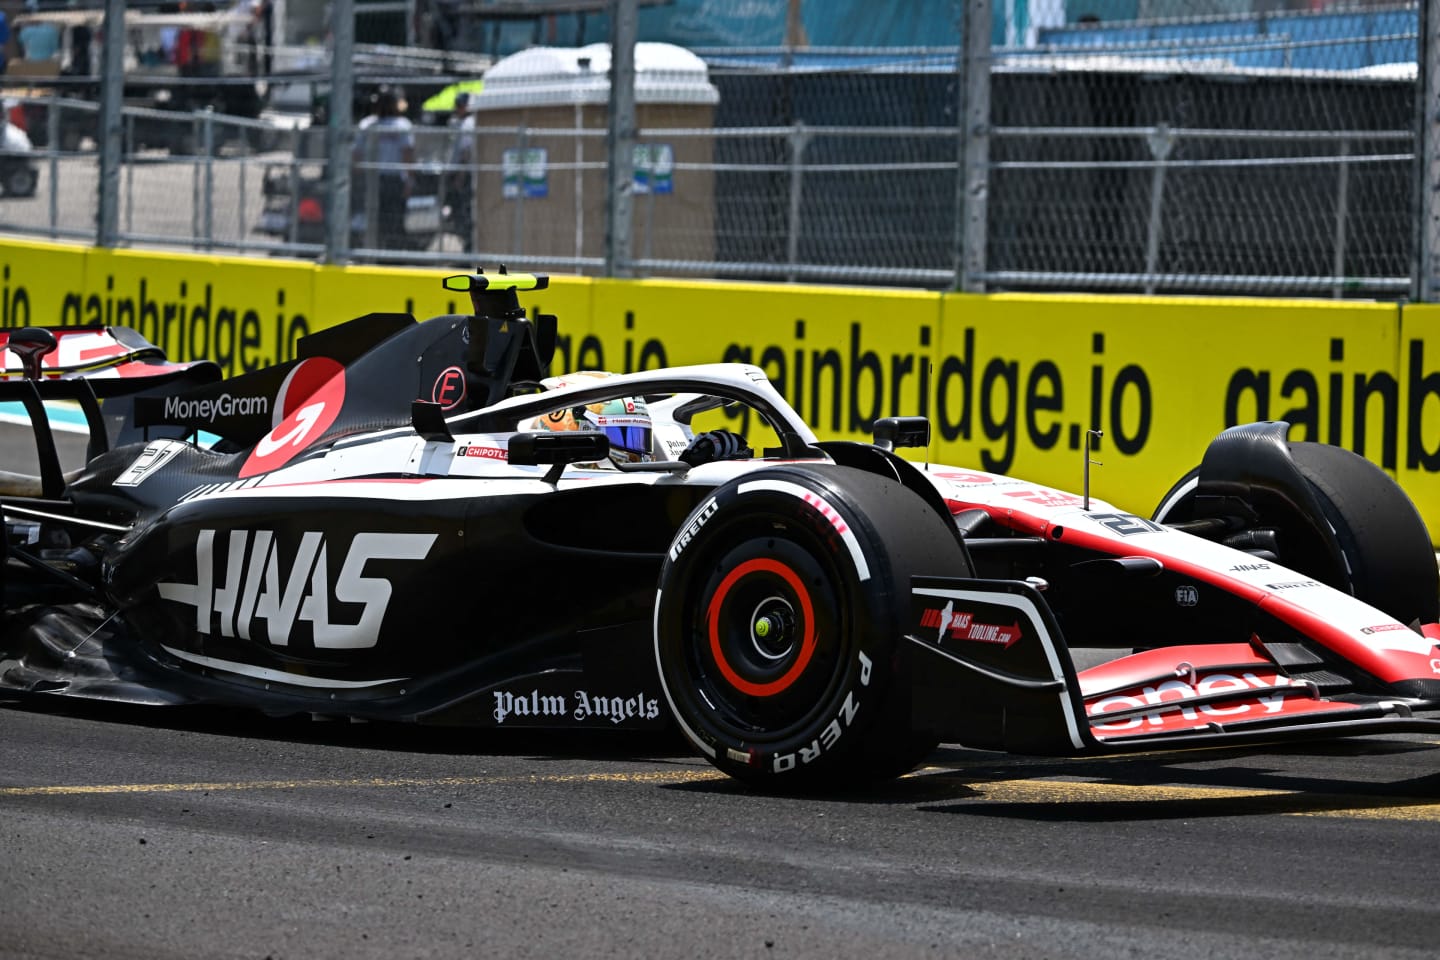 Haas F1 Team's German driver Nico Hulkenberg races during the first practice session for the 2023 Miami Formula One Grand Prix at the Miami International Autodrome in Miami Gardens, Florida, on May 5, 2023. (Photo by CHANDAN KHANNA / AFP) (Photo by CHANDAN KHANNA/AFP via Getty Images)